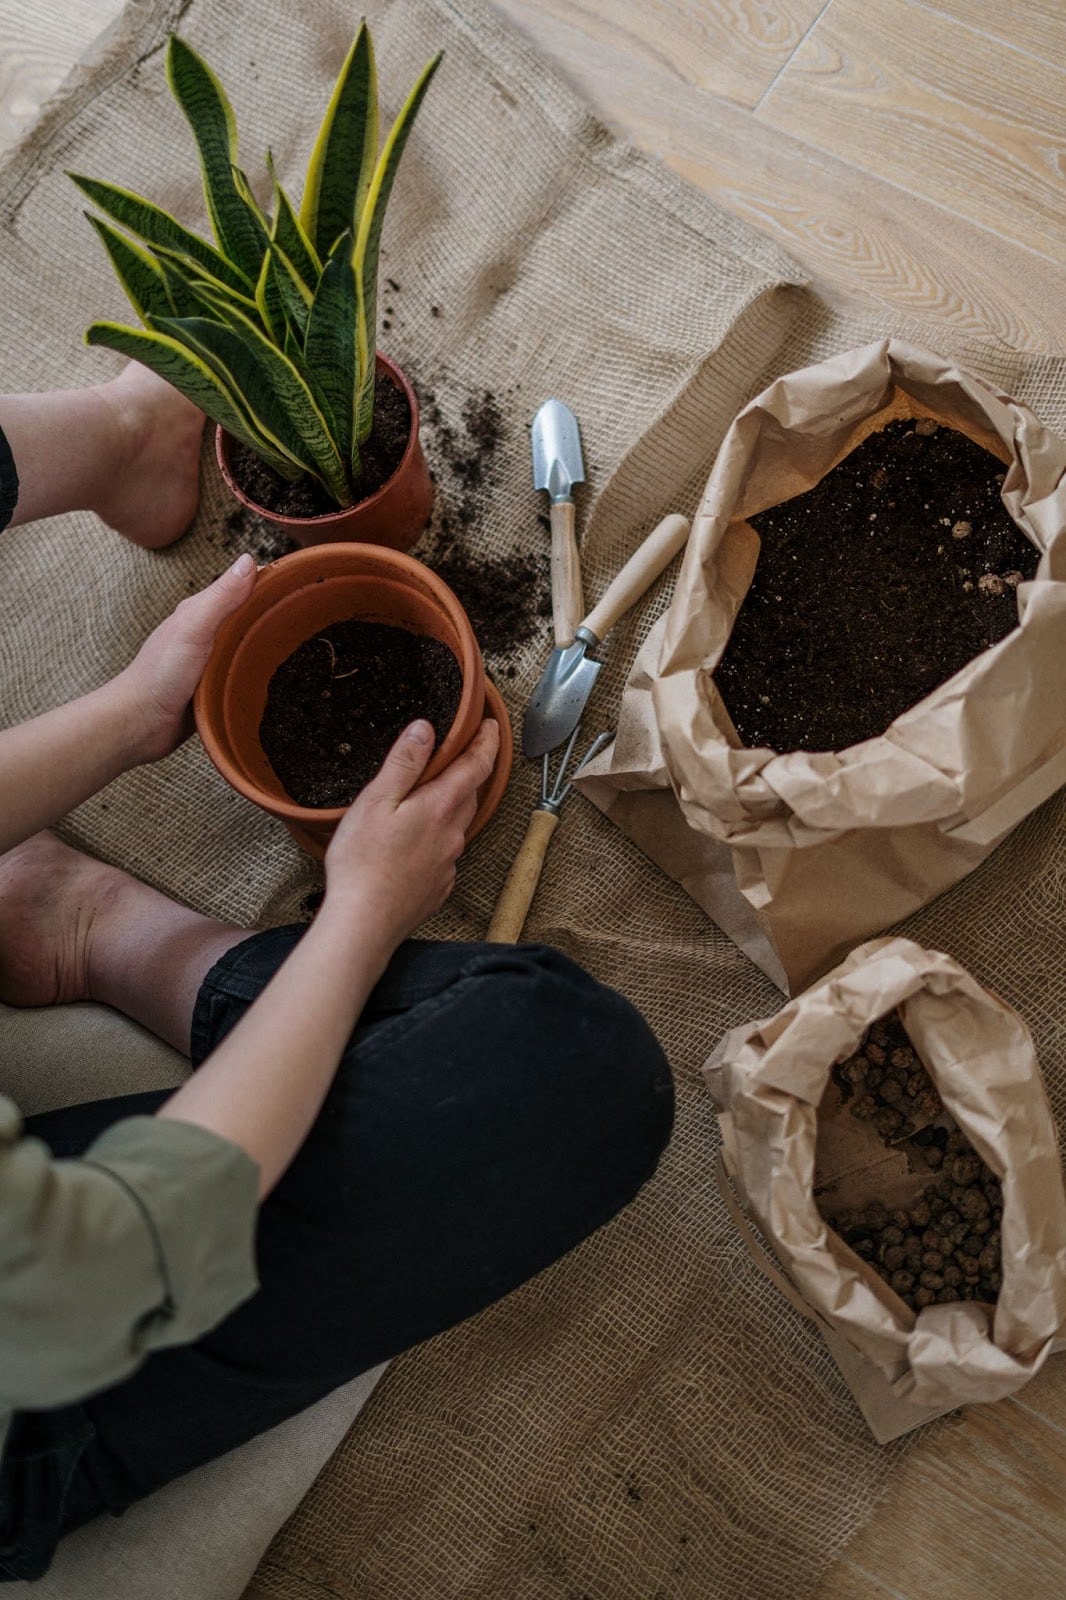 repotting a plant with